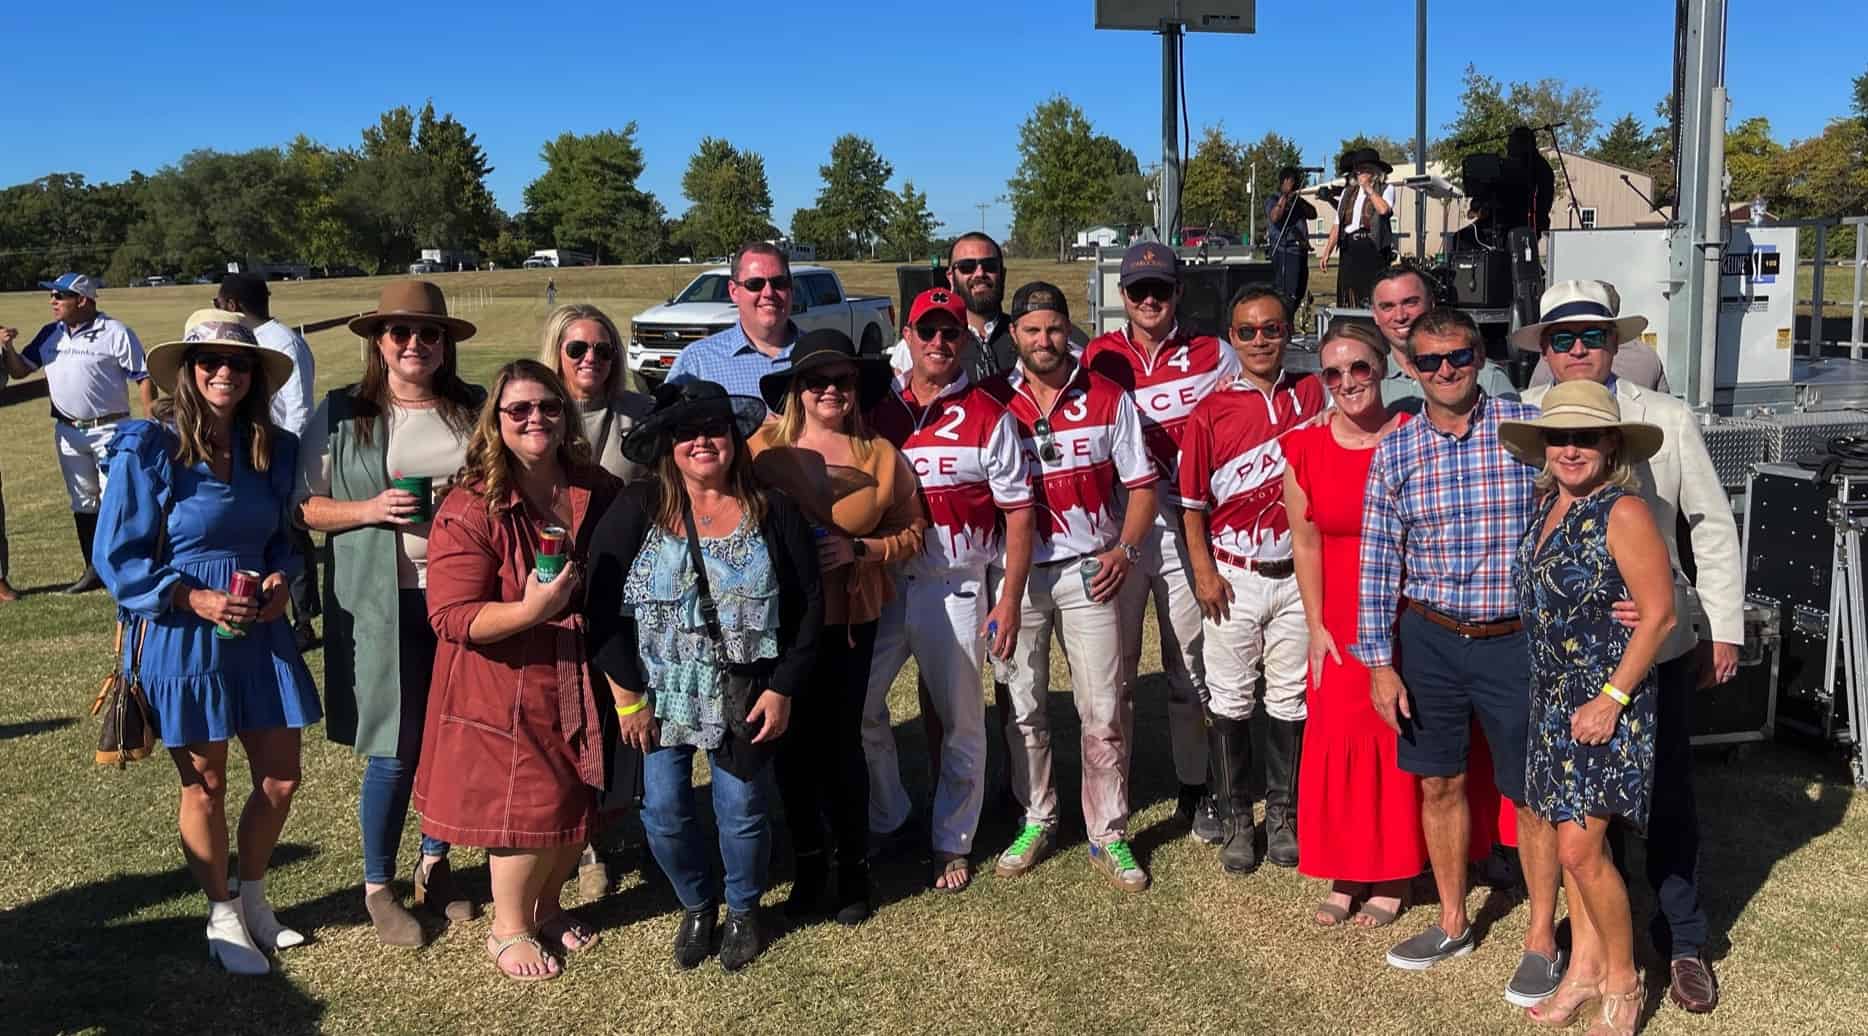 Pace team group photo with polo players at charity match